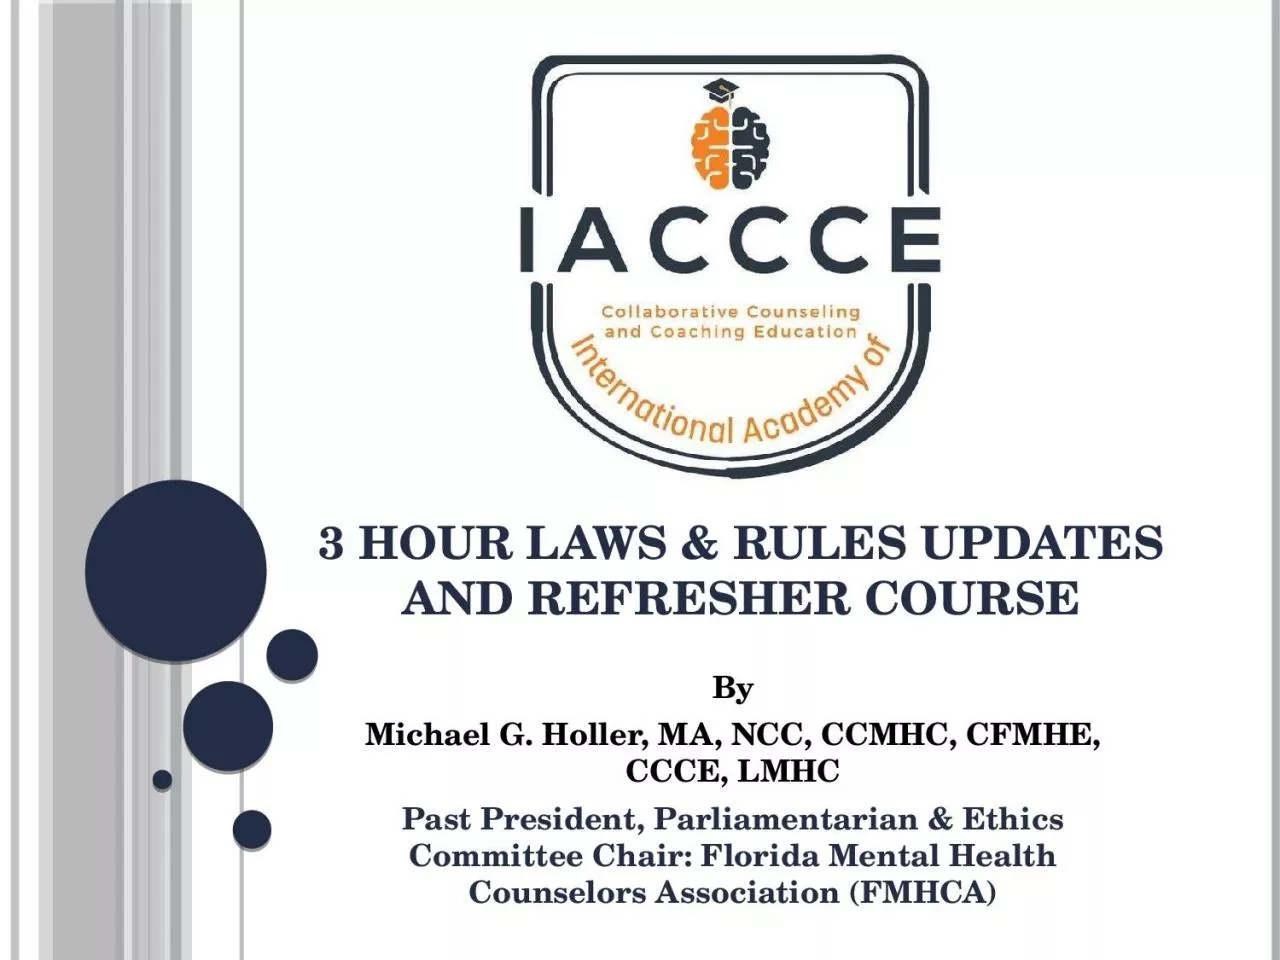 3 Hour Laws & Rules Updates and Refresher Course